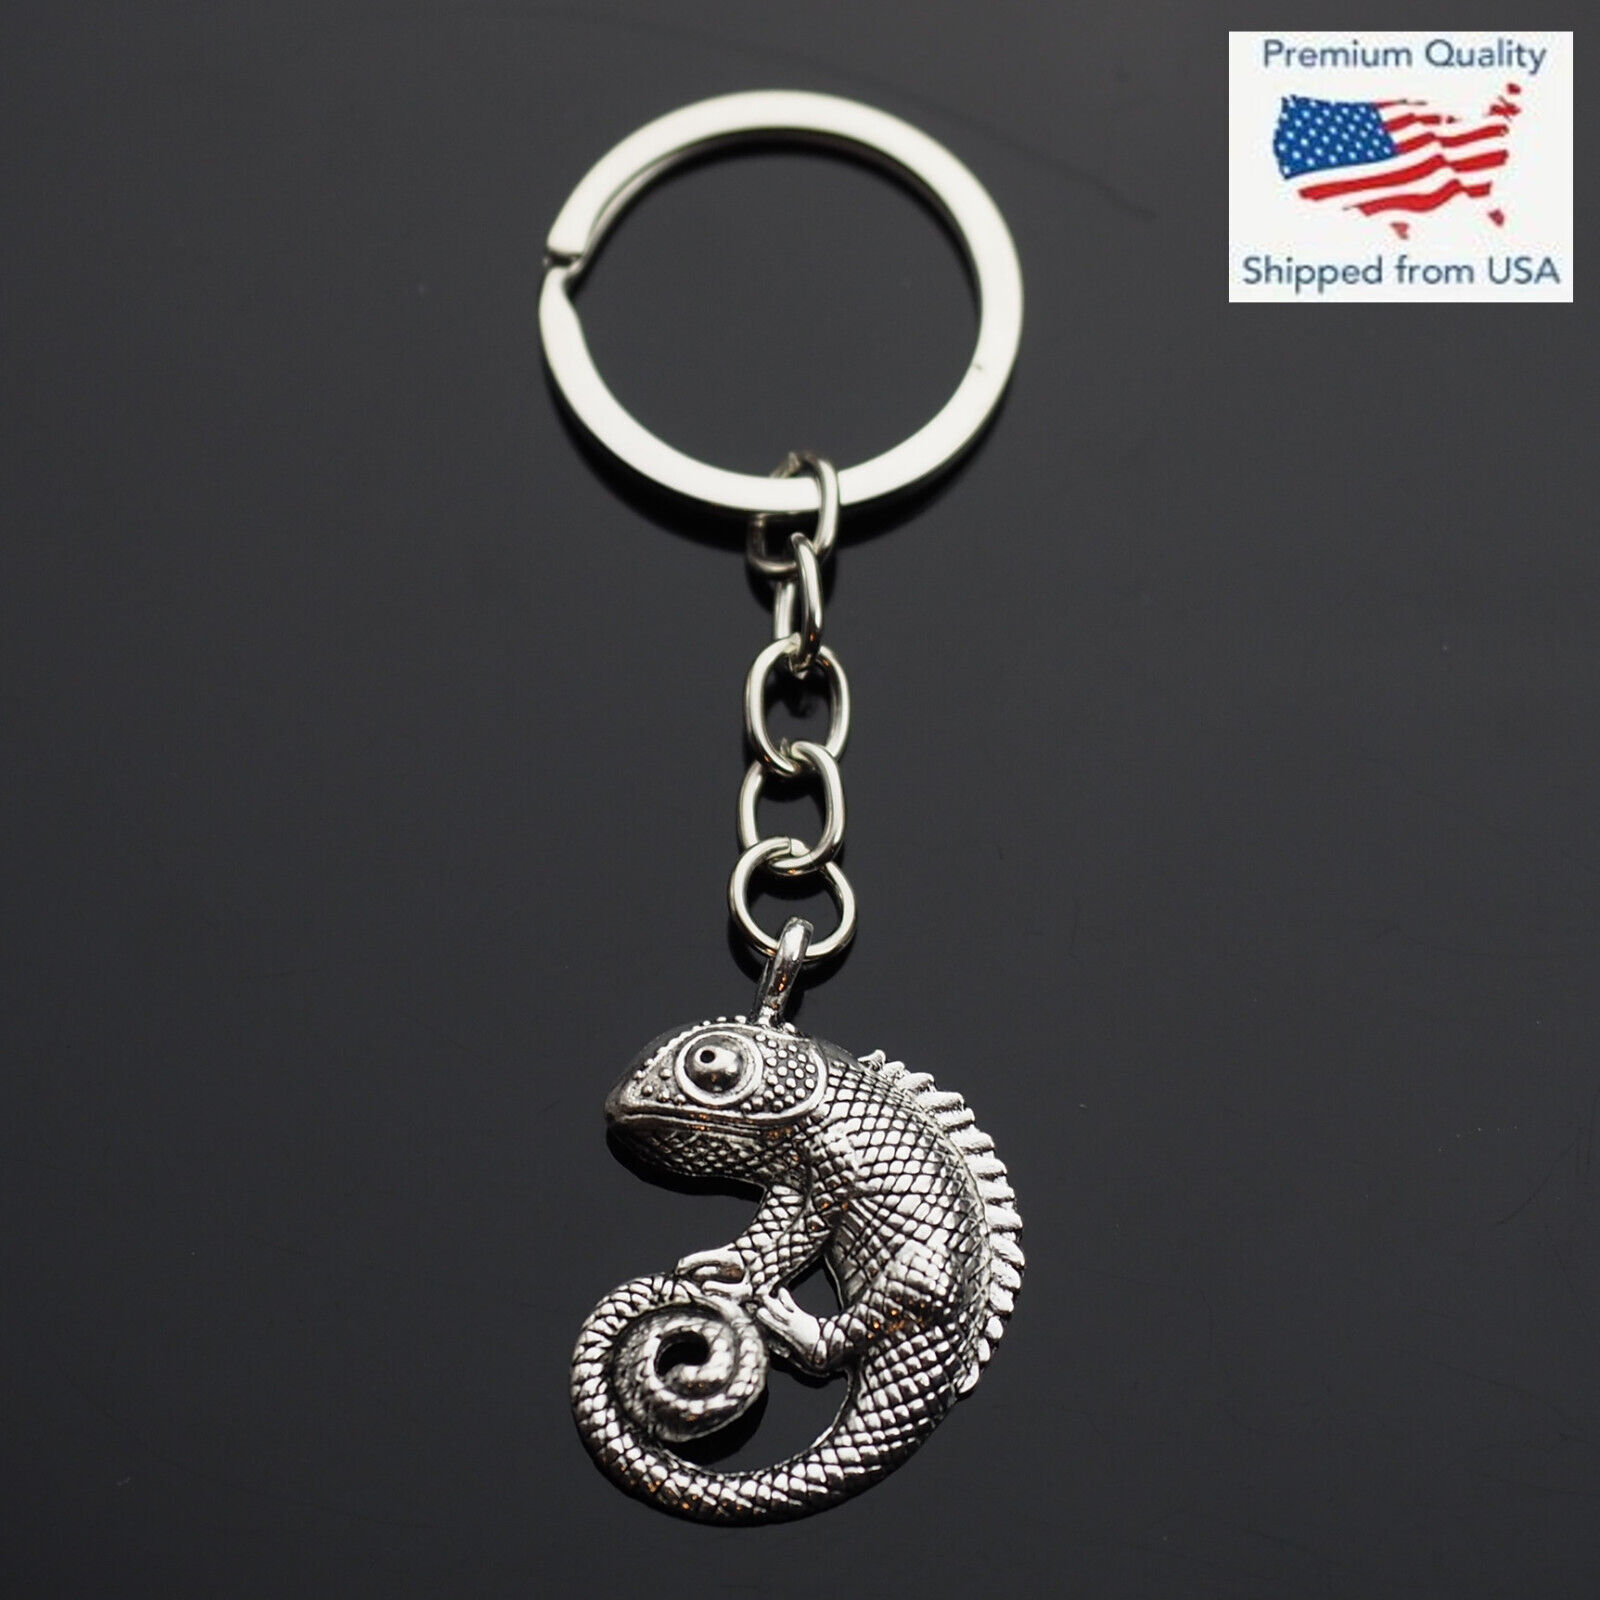 Chameleon Curly Tailed Lizard Charm Pendant Keychain Key Chain Ring Cute